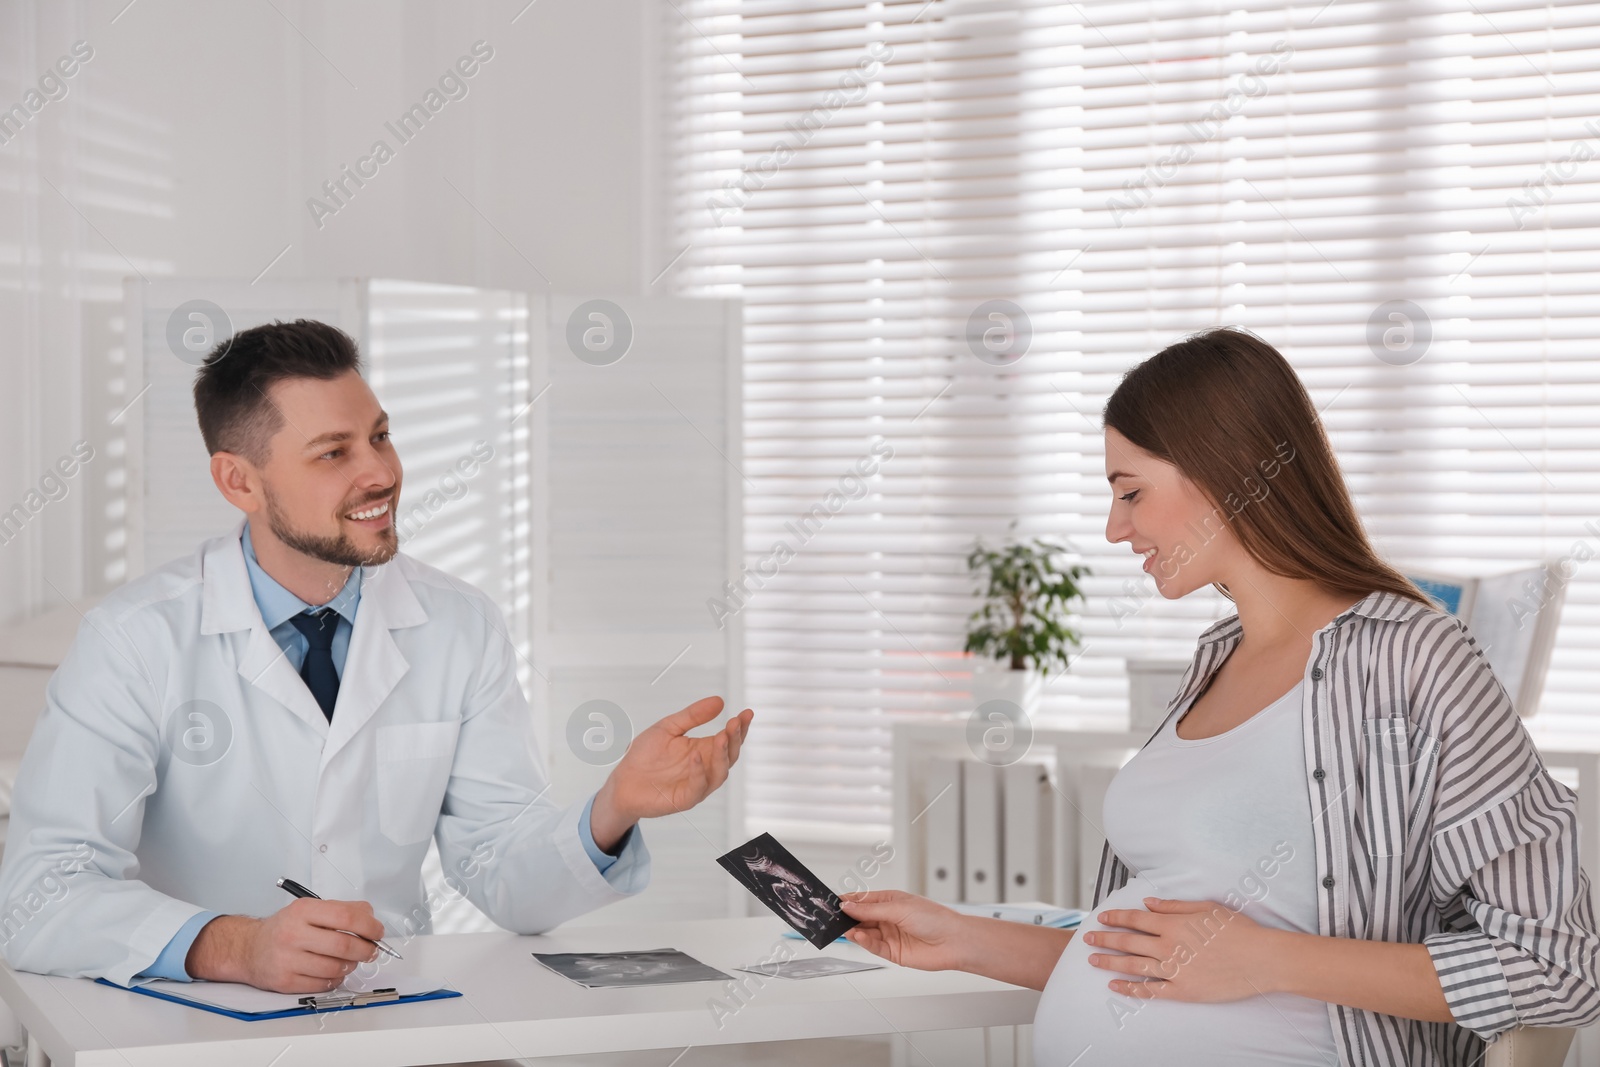 Photo of Pregnant woman with ultrasound picture at doctor's appointment in clinic